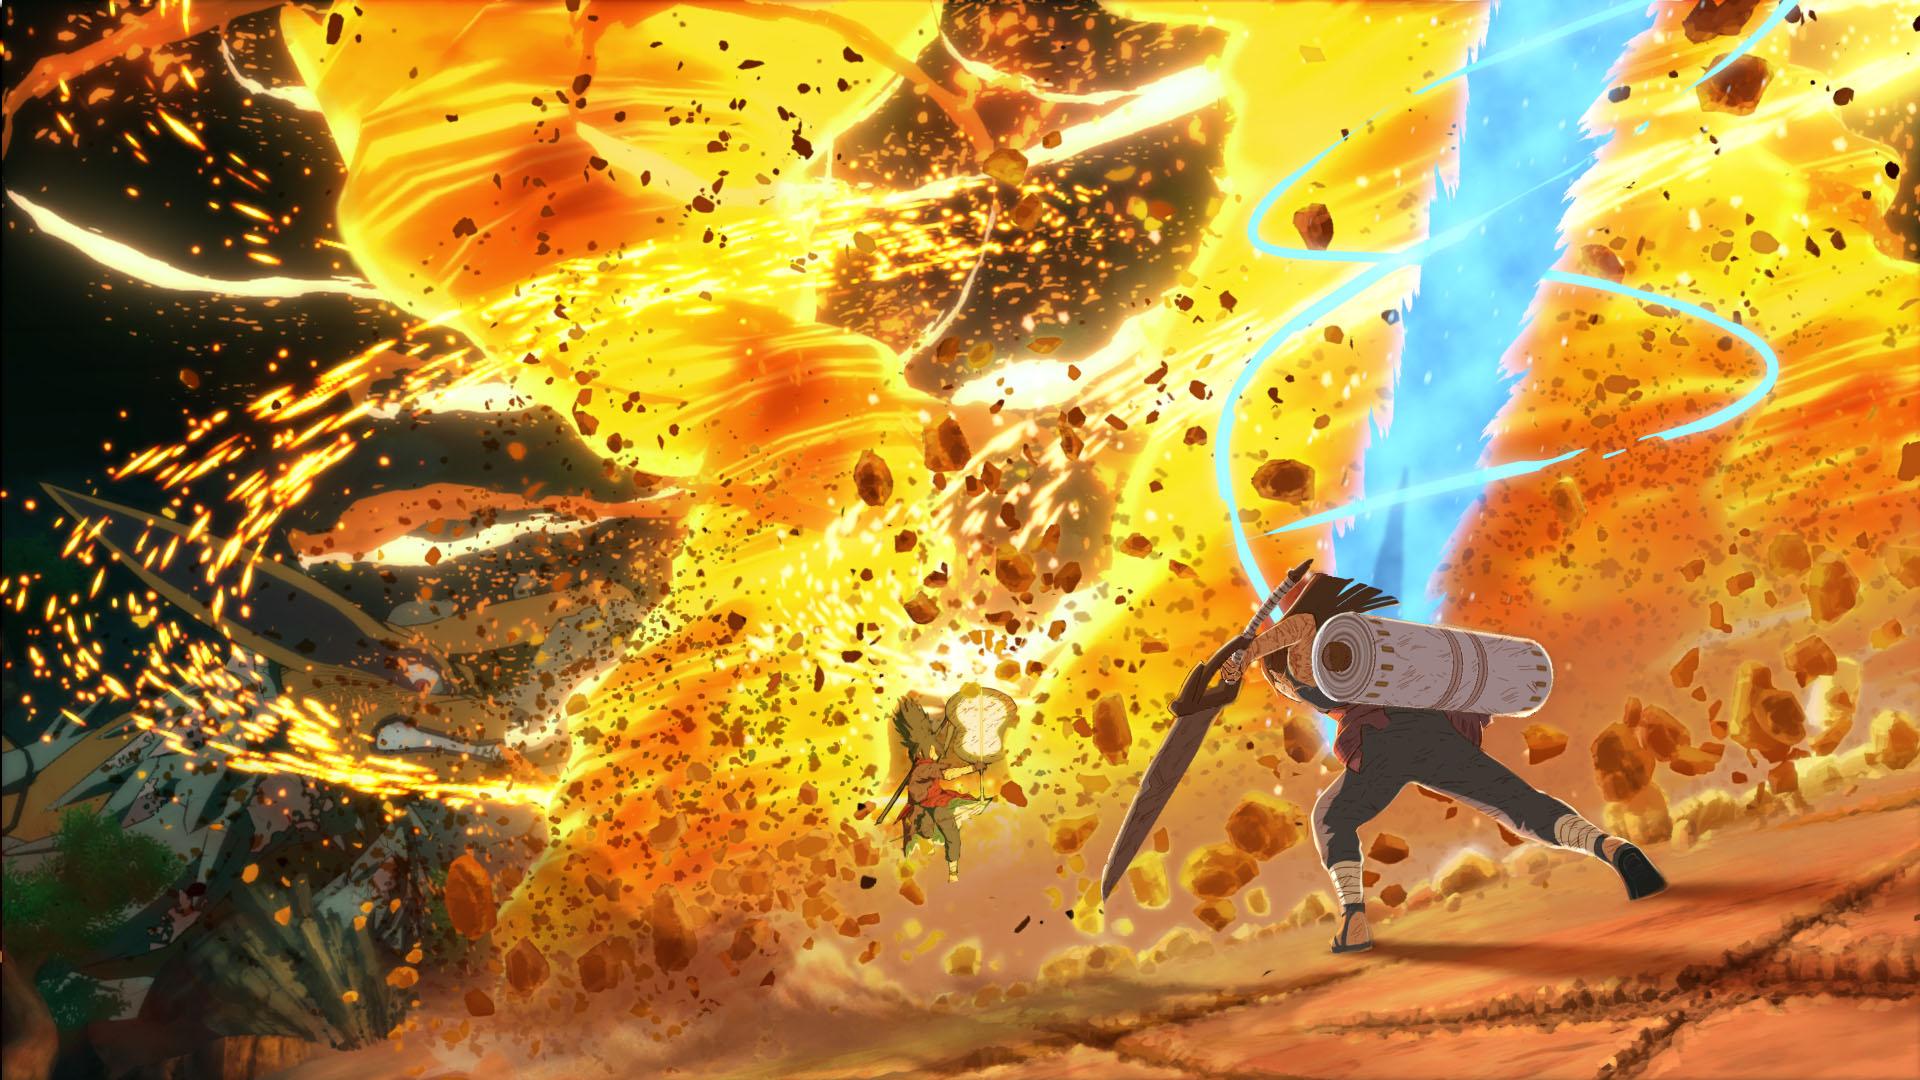 Naruto Shippuden: Ultimate Ninja Storm 4 Announced for PS4